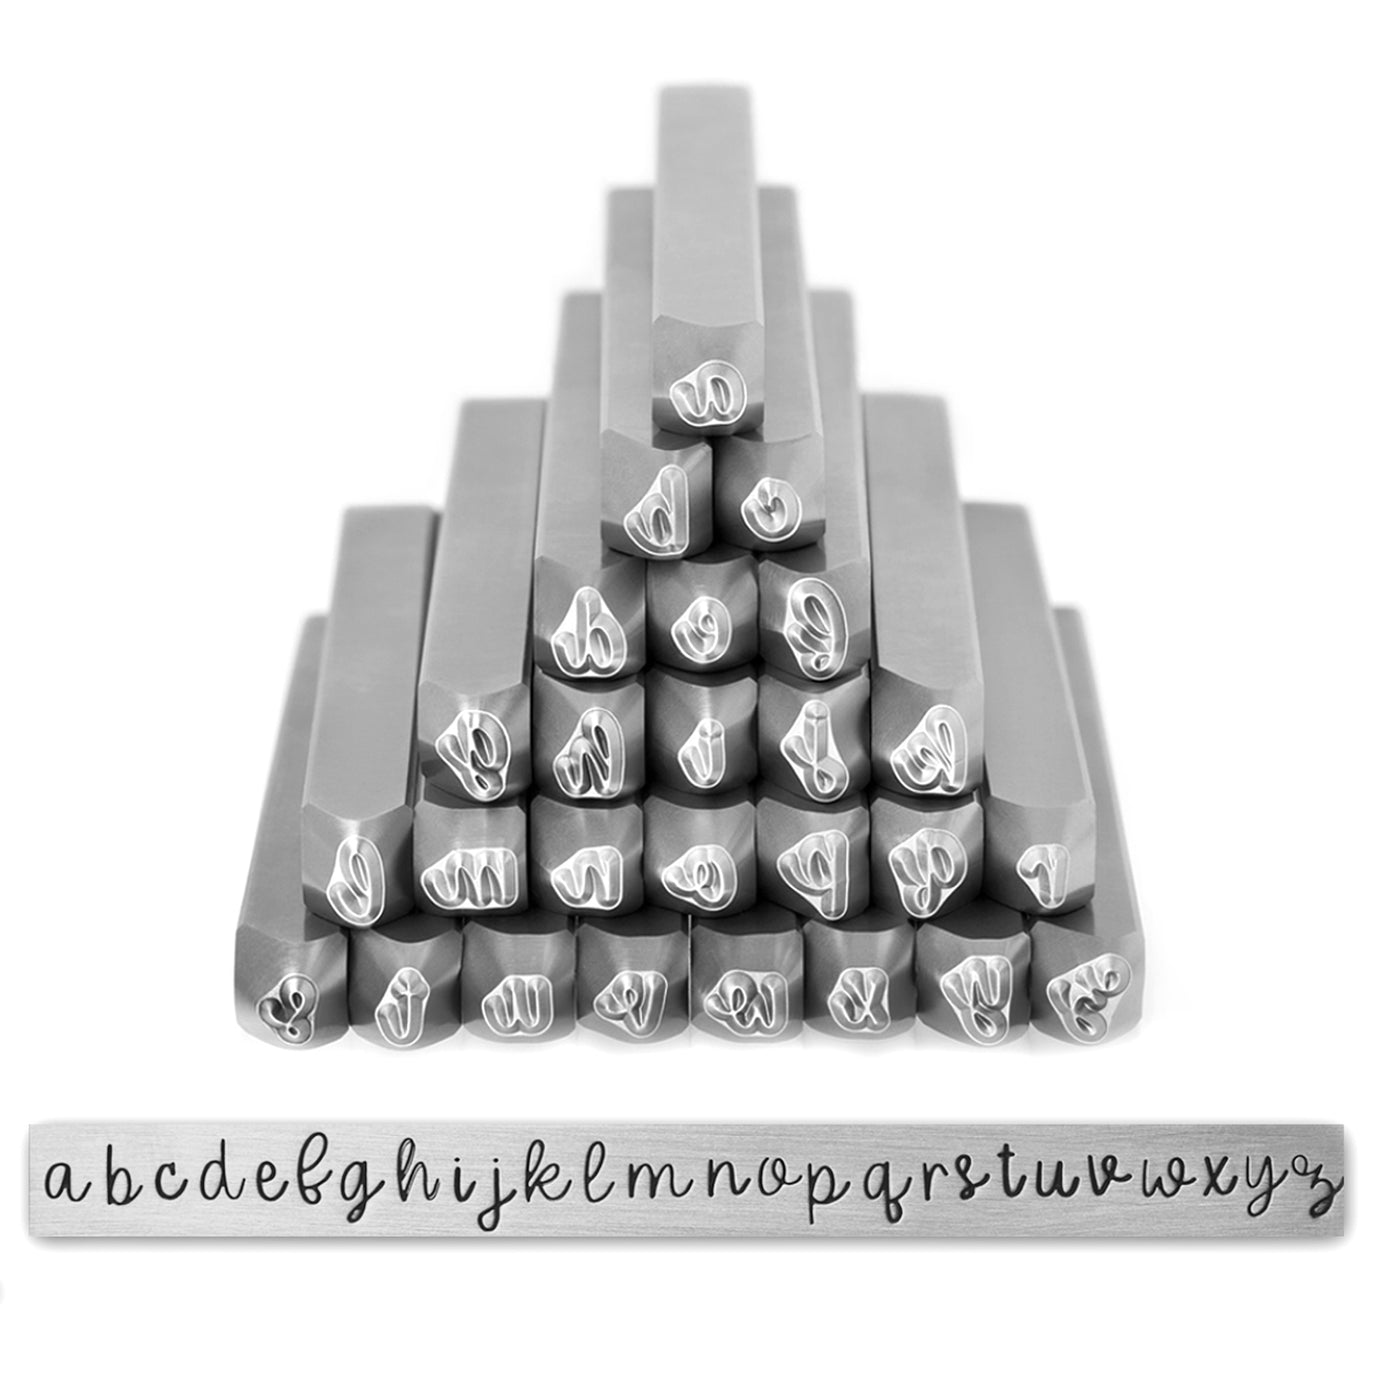 Script number Stamps, 3 mm size, tool hardened steel, metal stamping, for  jewelry metals